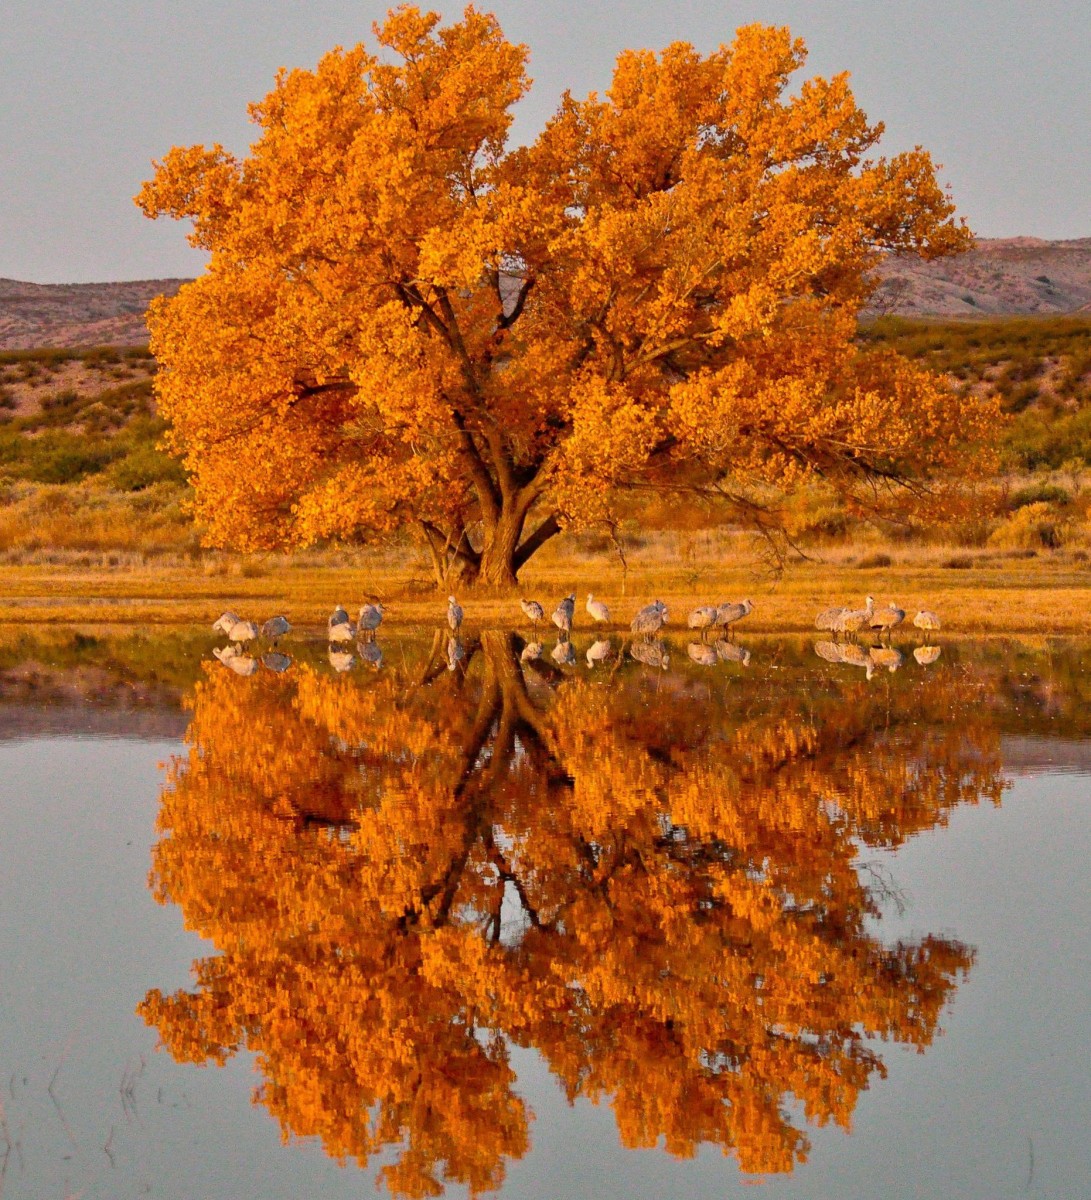 A tree with bright yellow leaves stands next to a still pond that shows the tree's reflection.